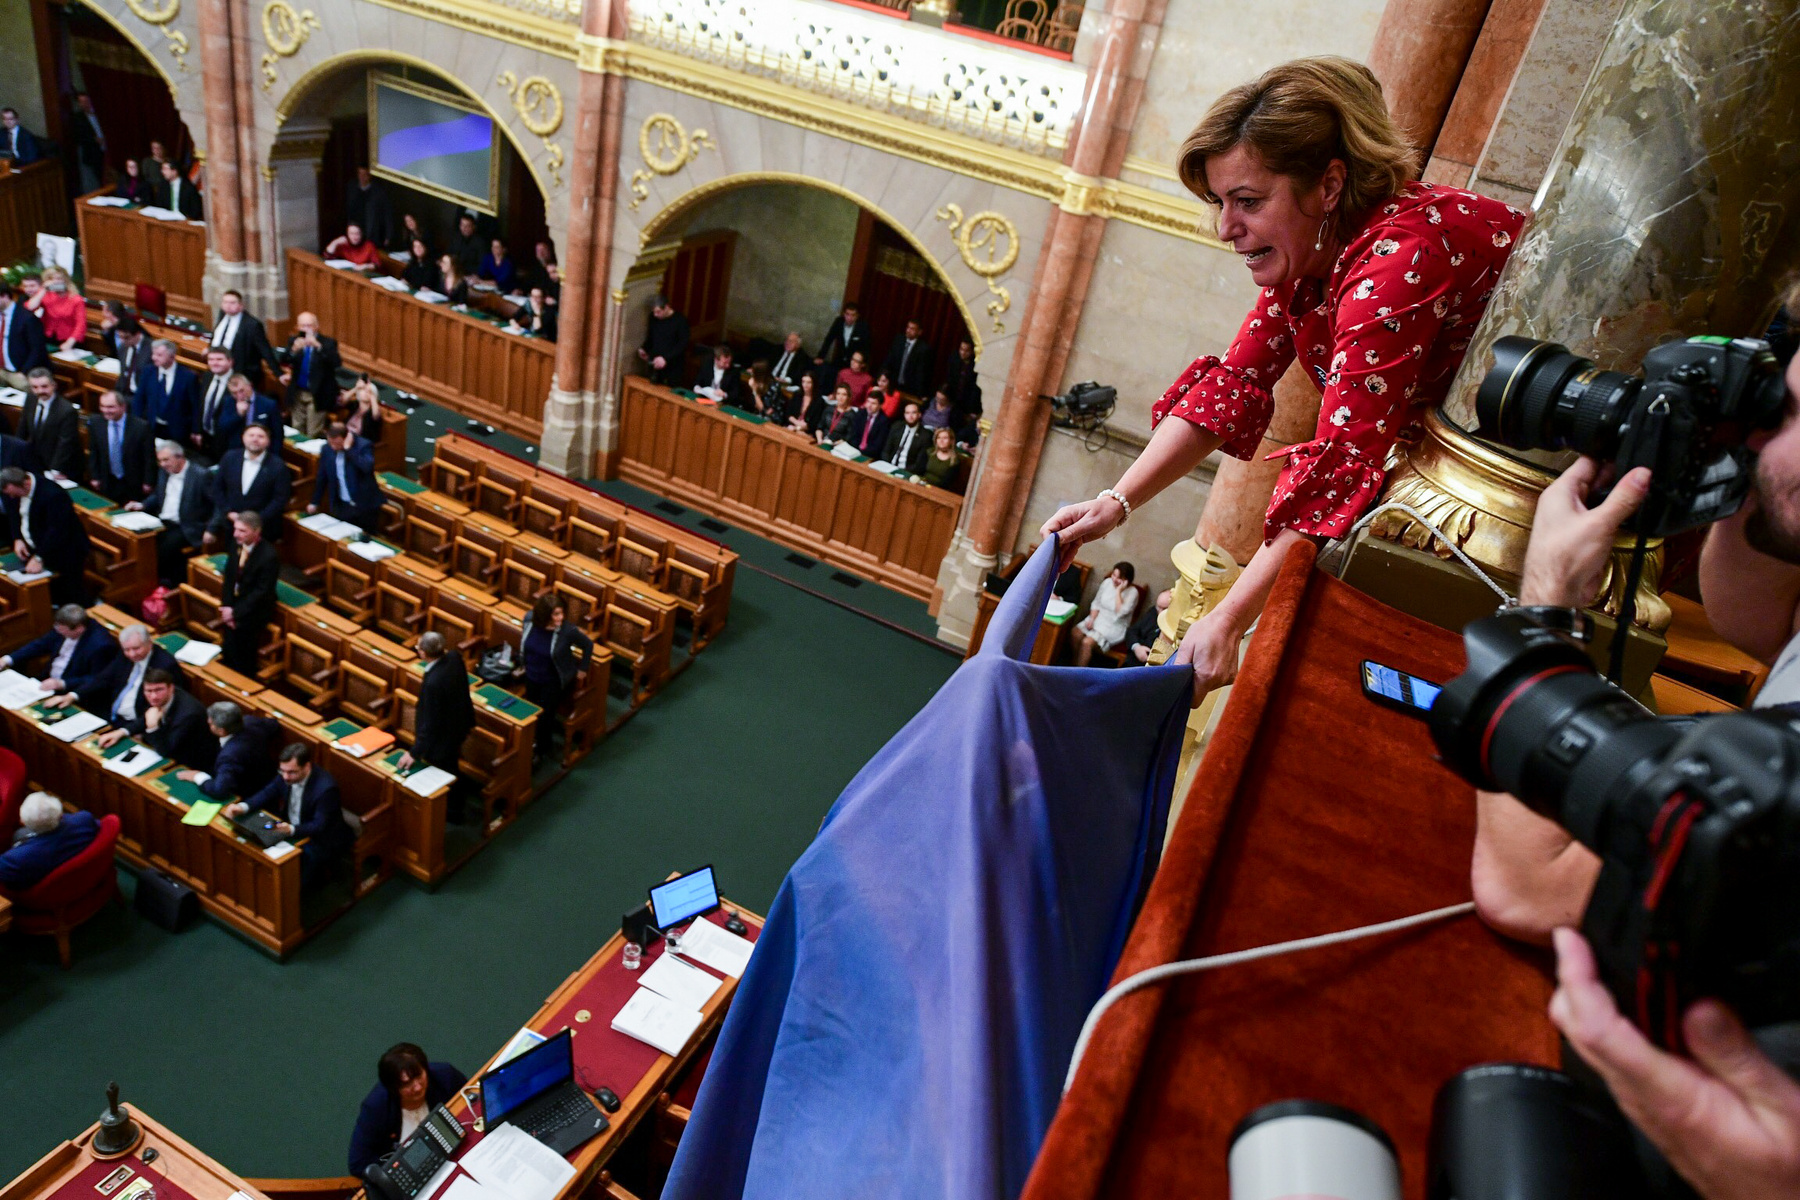 Opposition left the room, but came back for the vote on the Overtime Act - They sang the National Anthem (joined by some of the MPs of Fidesz), but the voting started - and resulted in Parliament passing the law without a problem.